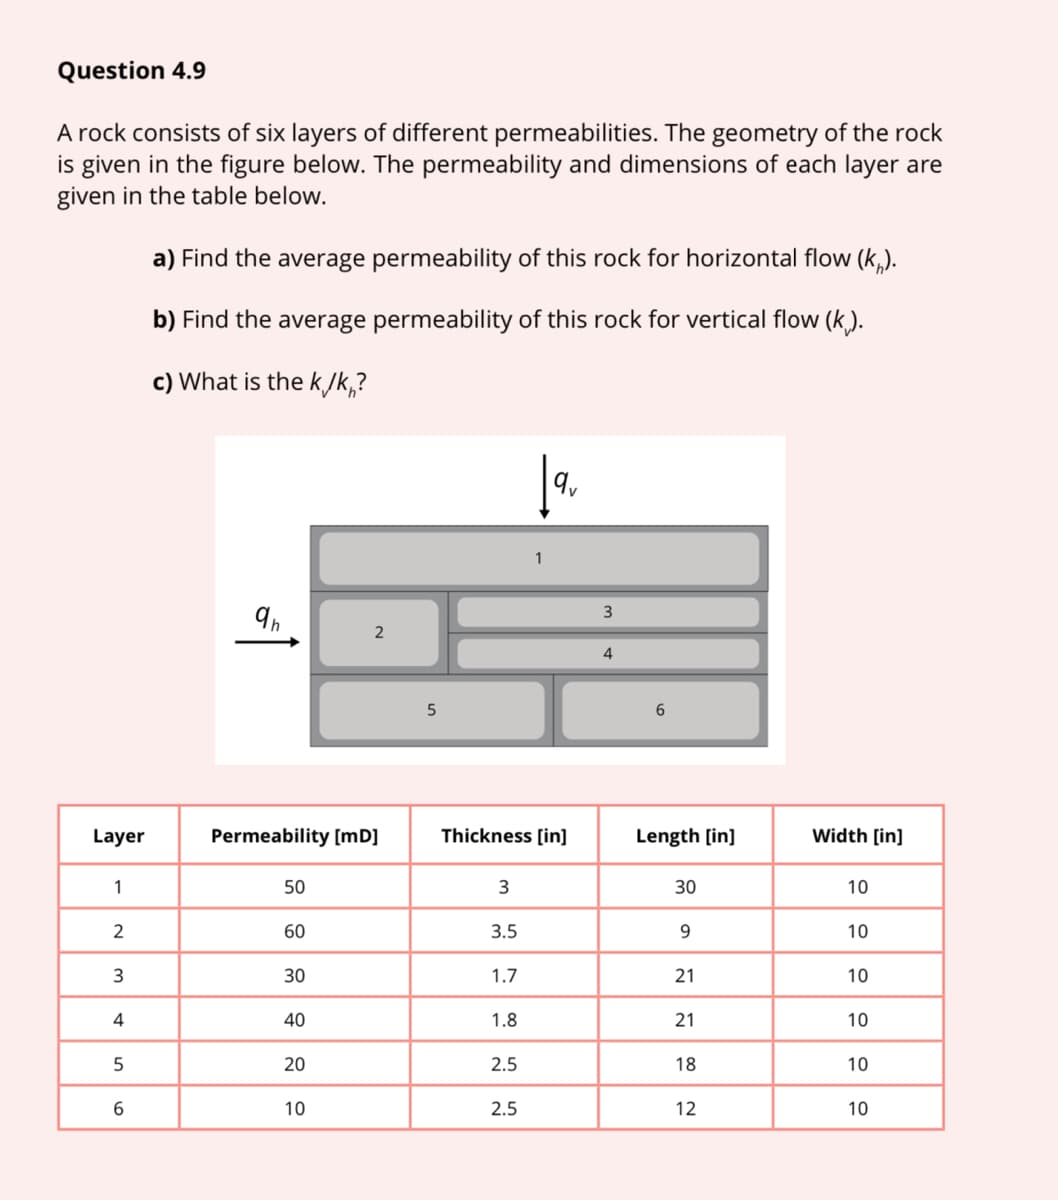 Question 4.9
A rock consists of six layers of different permeabilities. The geometry of the rock
is given in the figure below. The permeability and dimensions of each layer are
given in the table below.
a) Find the average permeability of this rock for horizontal flow (k,).
b) Find the average permeability of this rock for vertical flow (k).
c) What is the k /k,?
1
2
4
6
Layer
Permeability [mD]
Thickness [in]
Length [in]
Width [in]
1
50
30
10
2
60
3.5
9.
10
3
30
1.7
21
10
4
40
1.8
21
10
20
2.5
18
10
10
2.5
12
10
